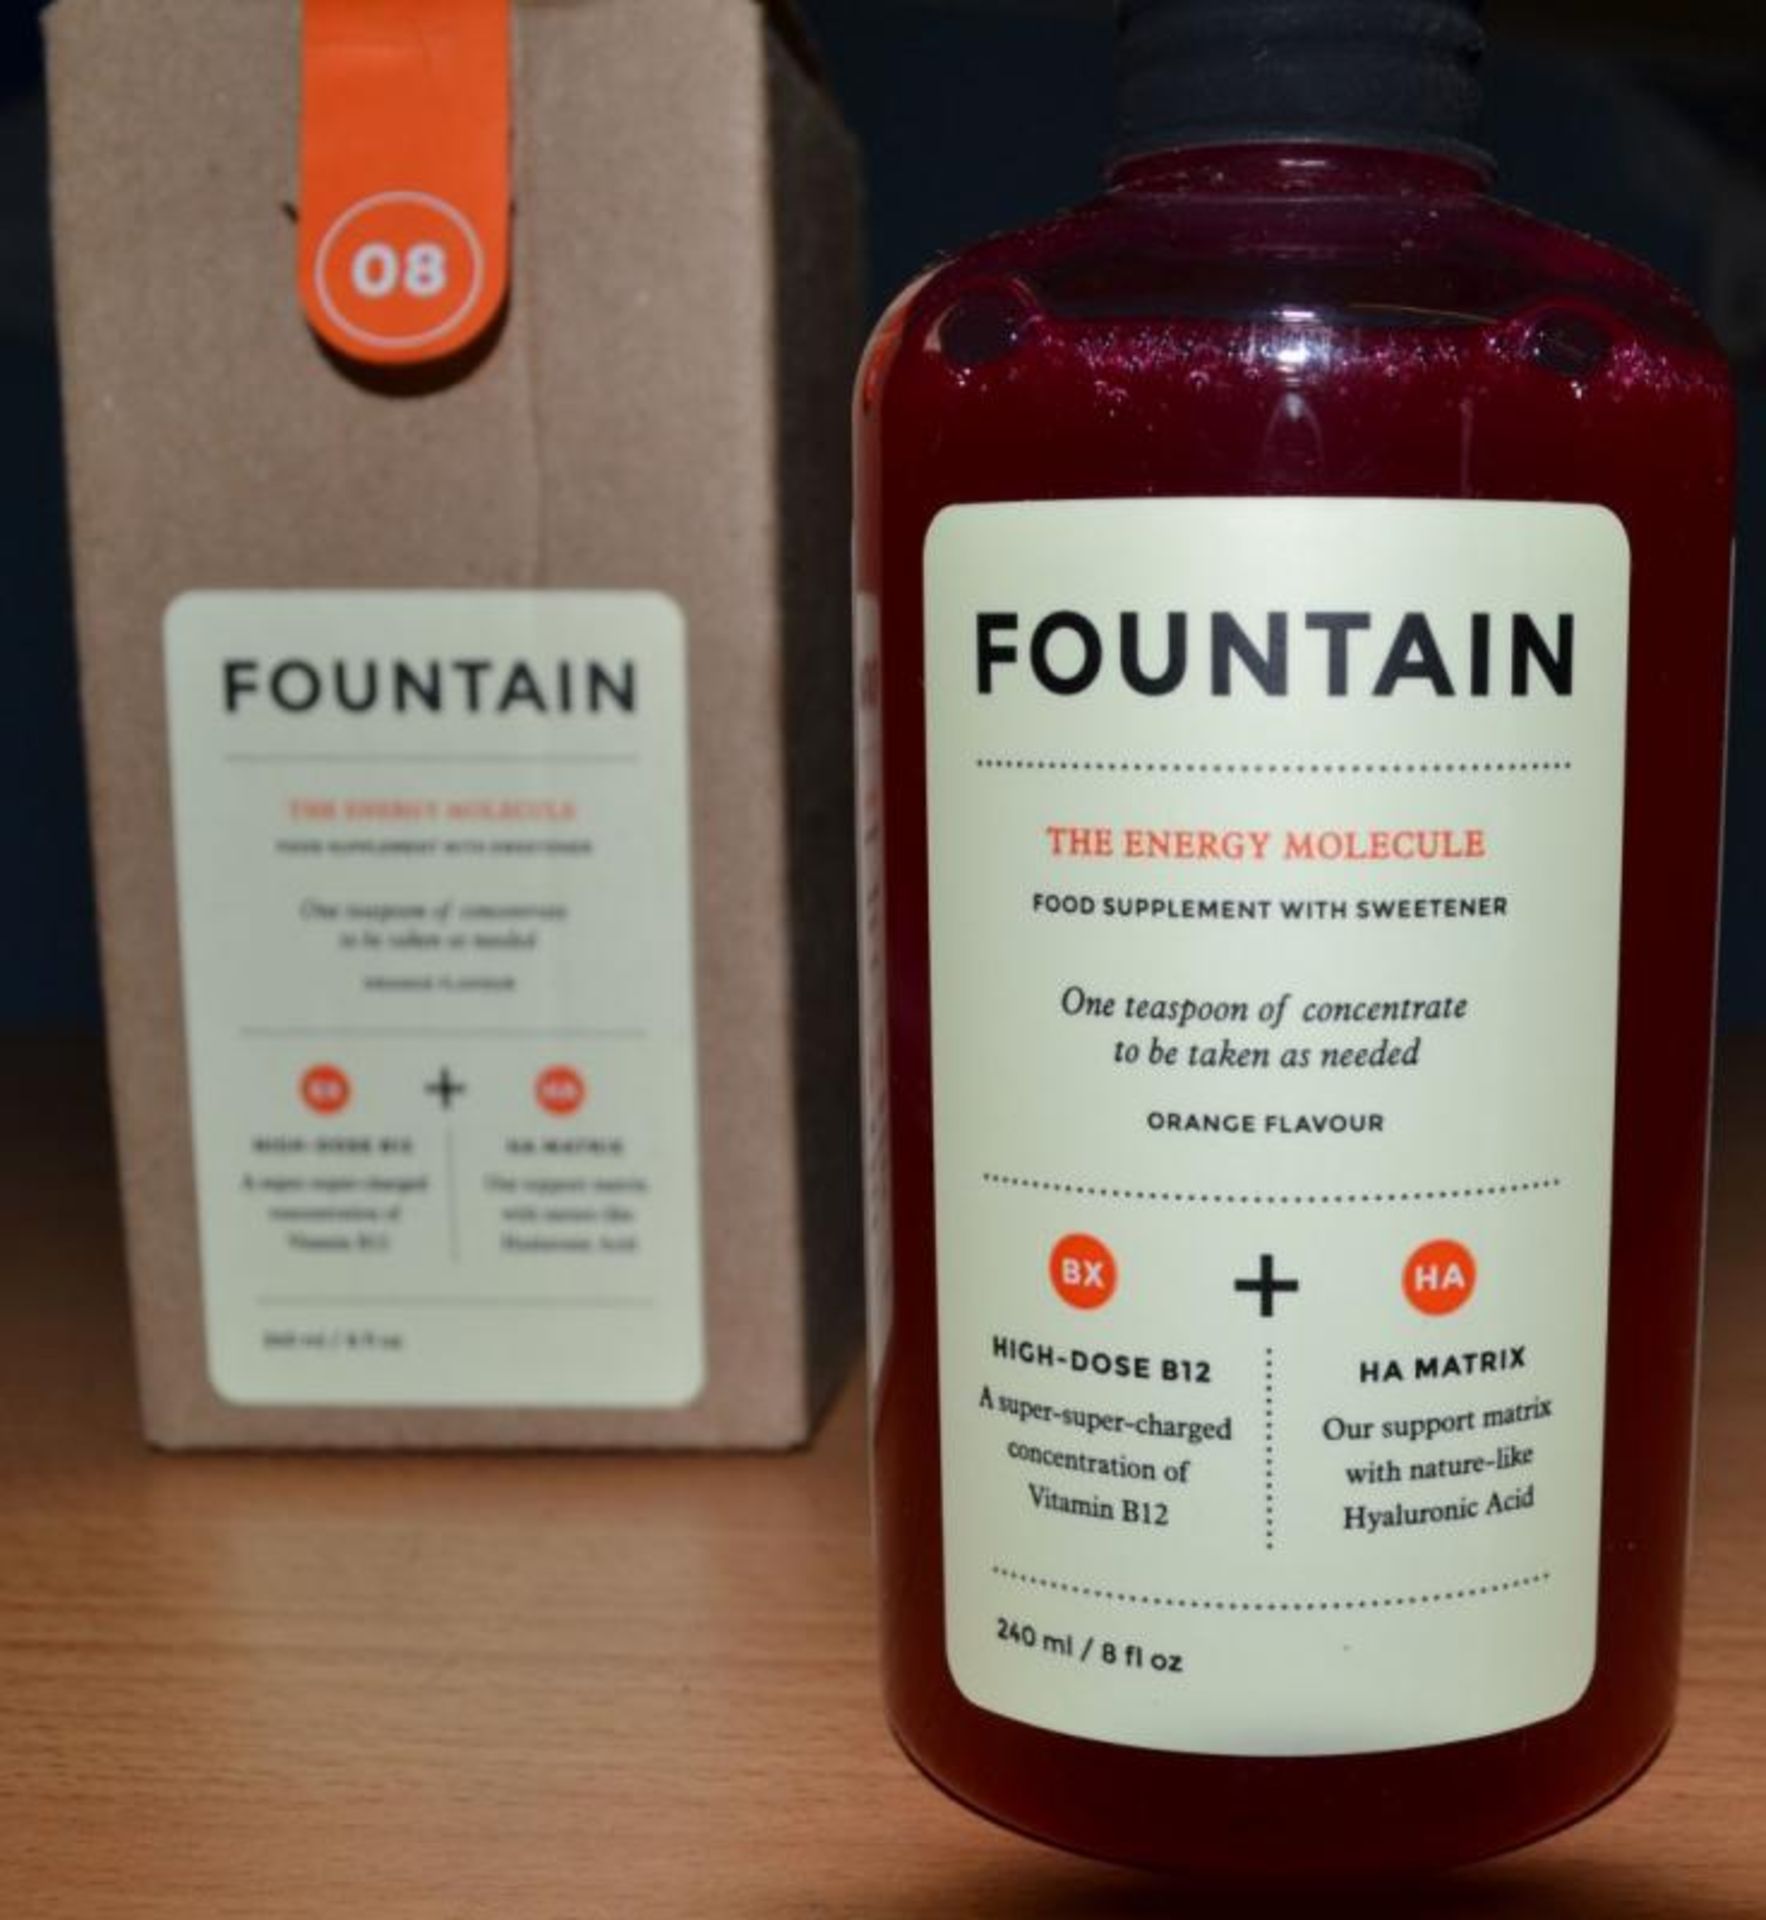 10 x 240ml Bottles of Fountain, The Energy Molecule Supplement - New & Boxed - CL185 - Ref: - Image 3 of 7